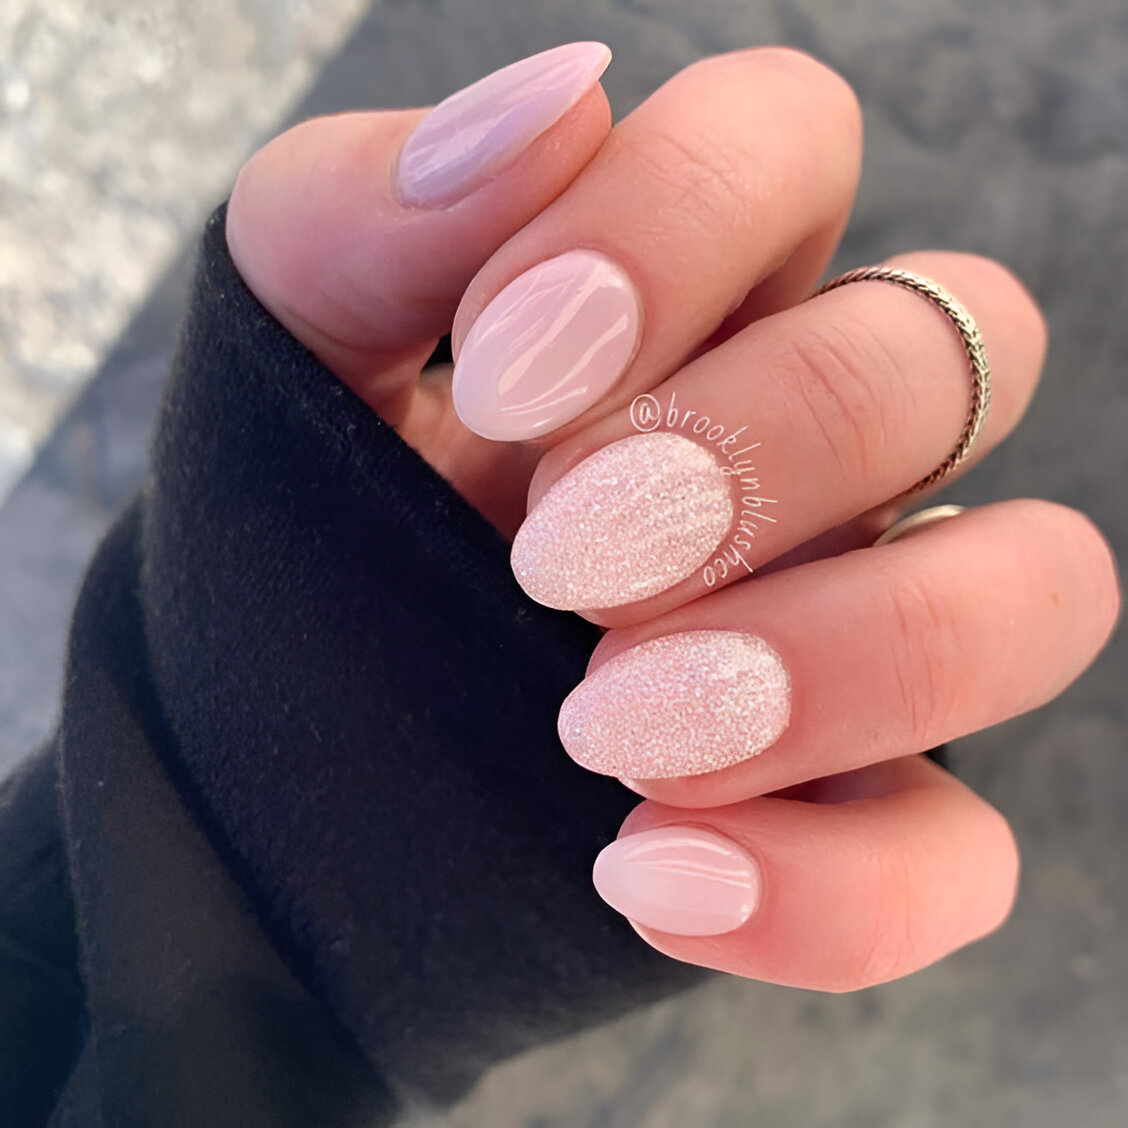 Short Almond Shaped Nails With Pink Glitter